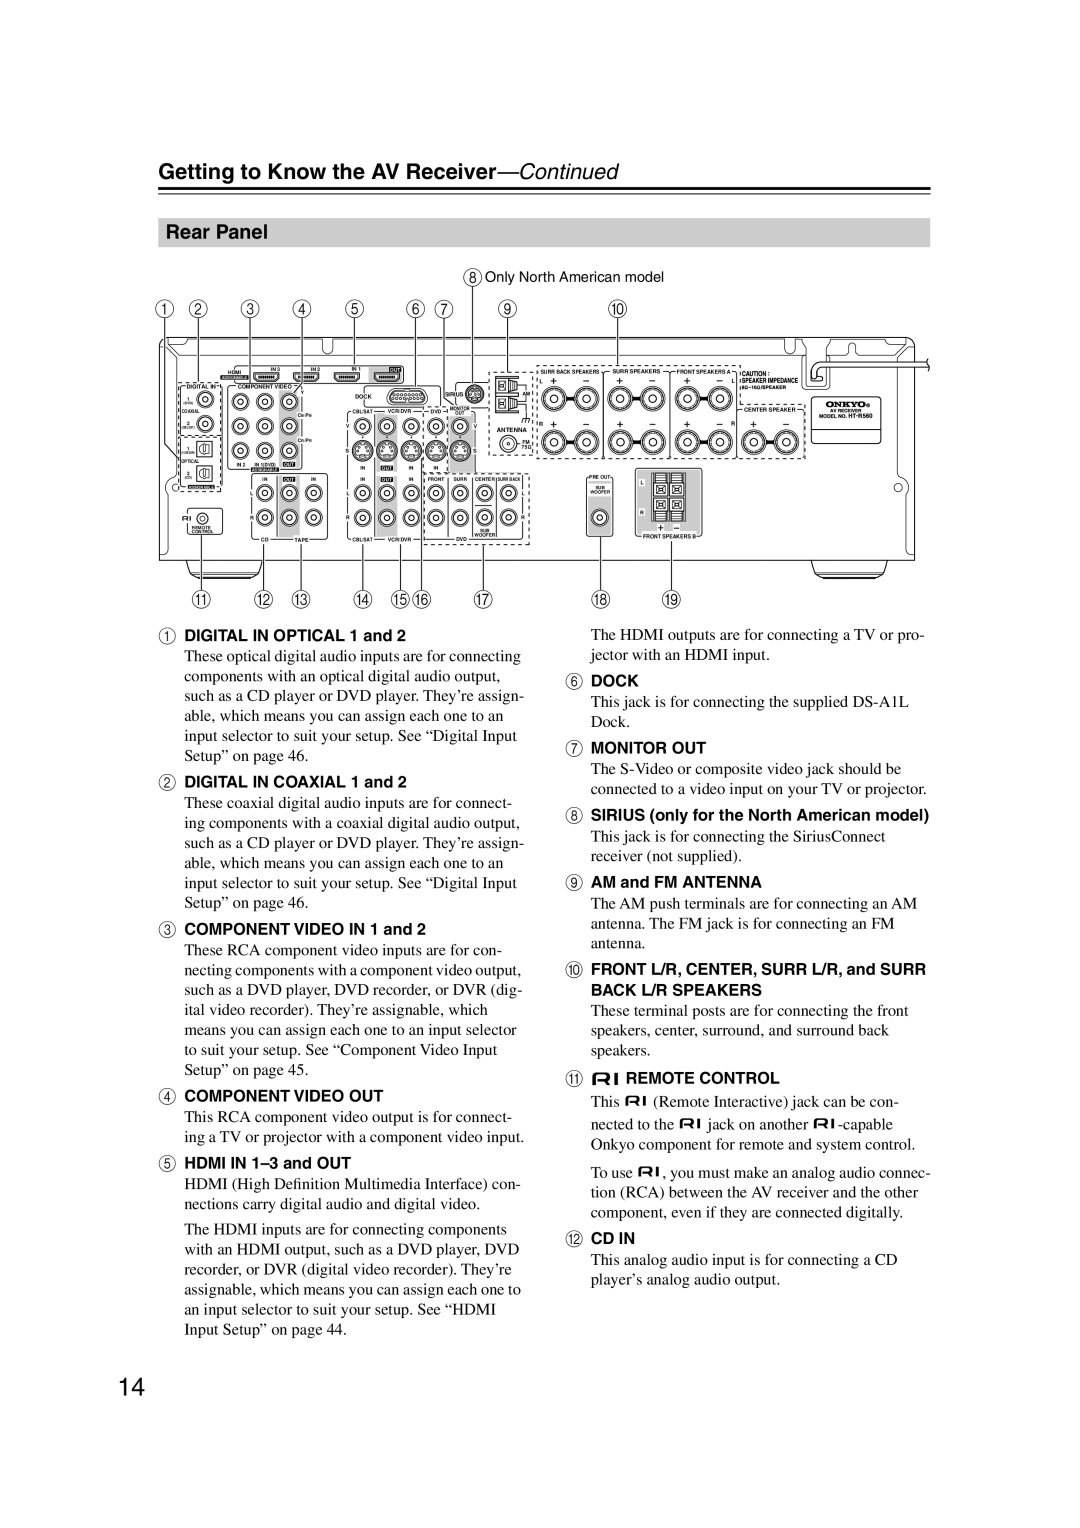 Onkyo HT-S5100 instruction manual Rear Panel, Getting to Know the AV Receiver—Continued, K L M N Op Q 